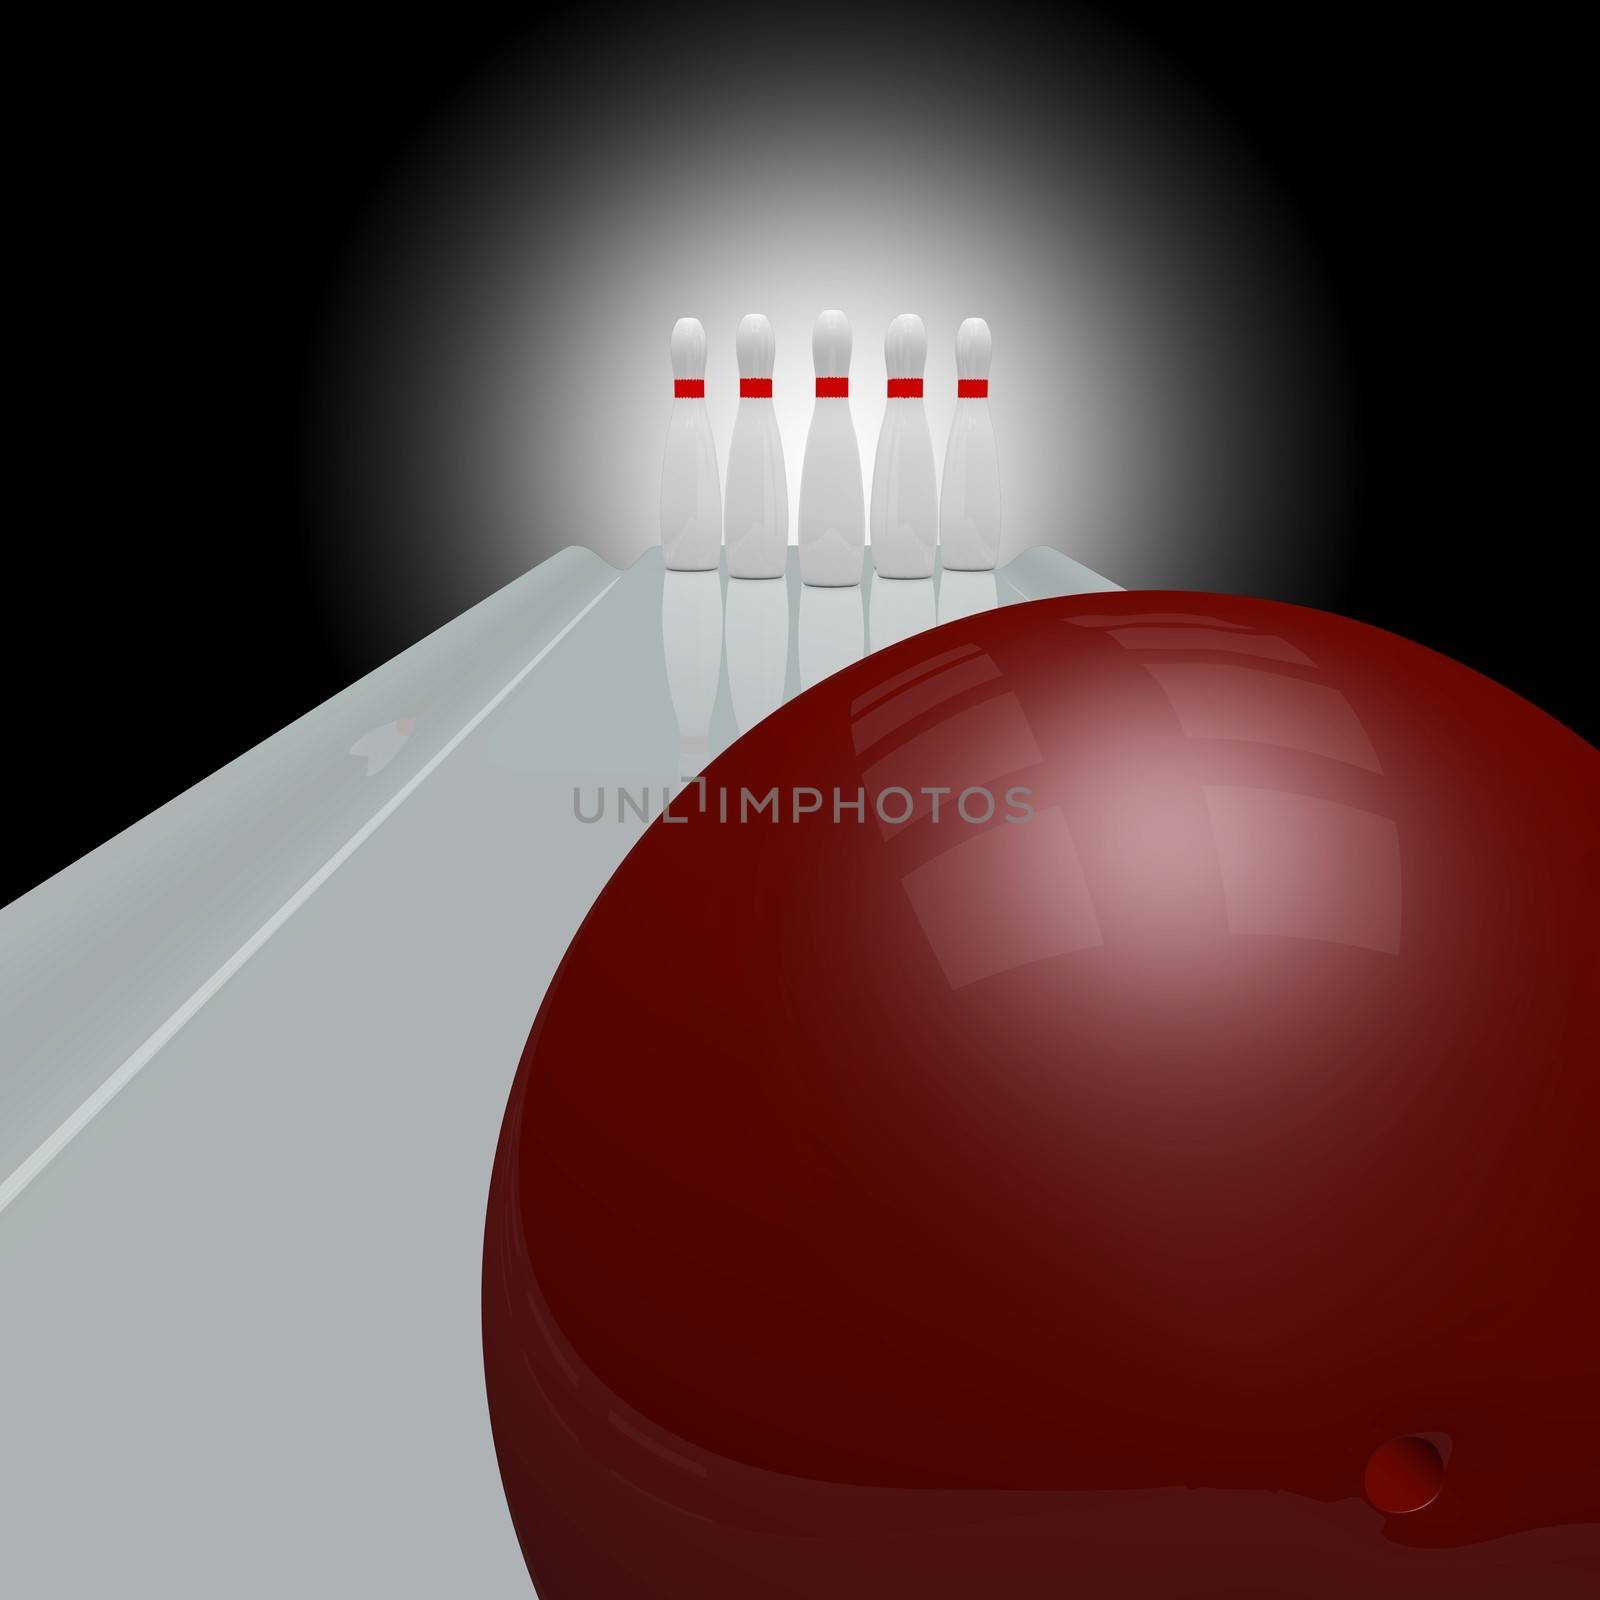 3d bowling alley scene with white bowling pins and a red ball waiting to be thrown
